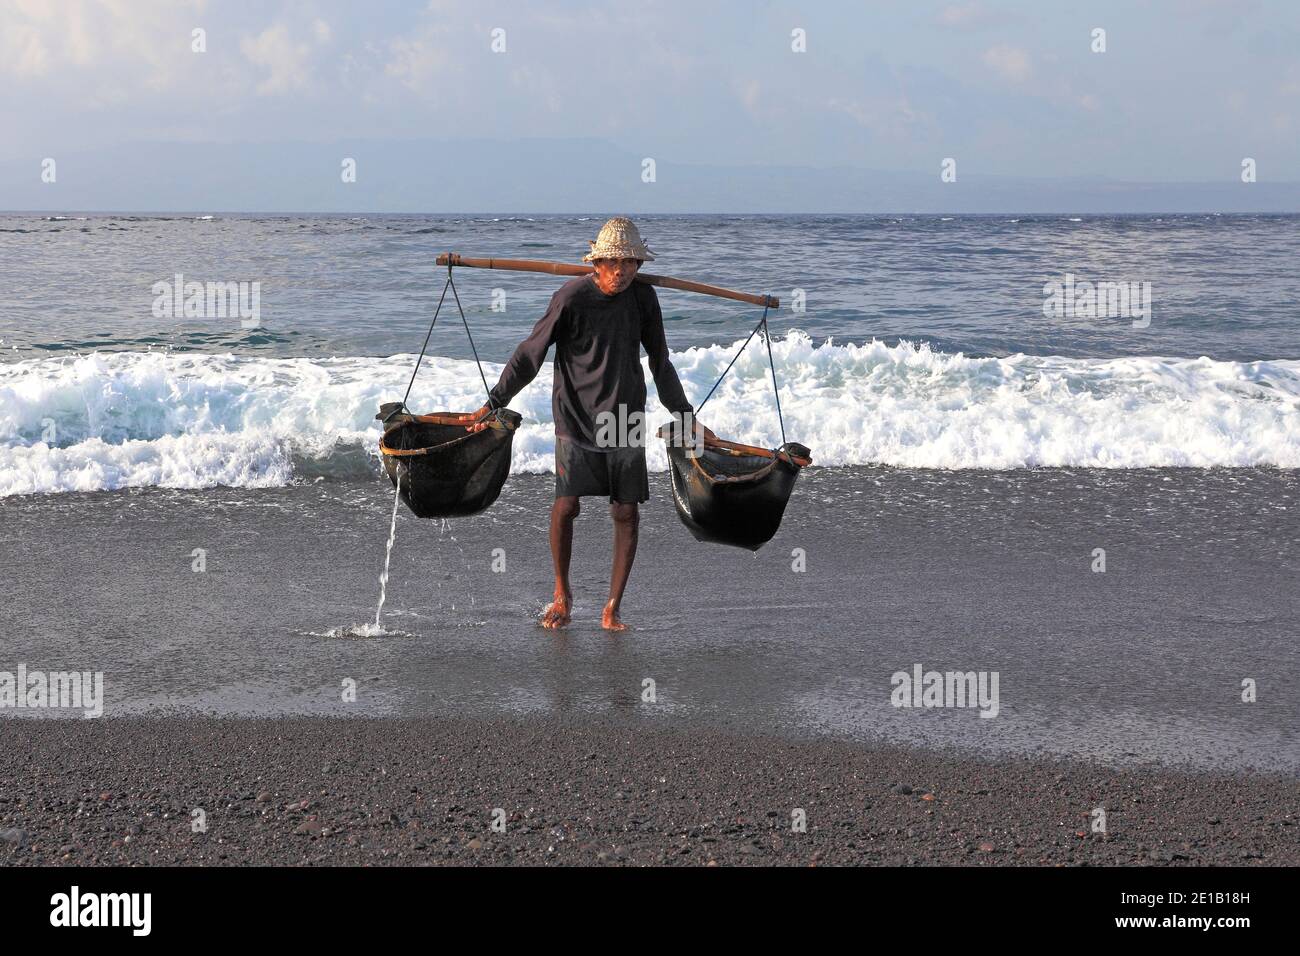 One of the few remaining traditional salt makers in Bali, at Kusamba Beach.  Bali, Indonesia. Workers start before sunrise to water the sand with sea w  Stock Photo - Alamy